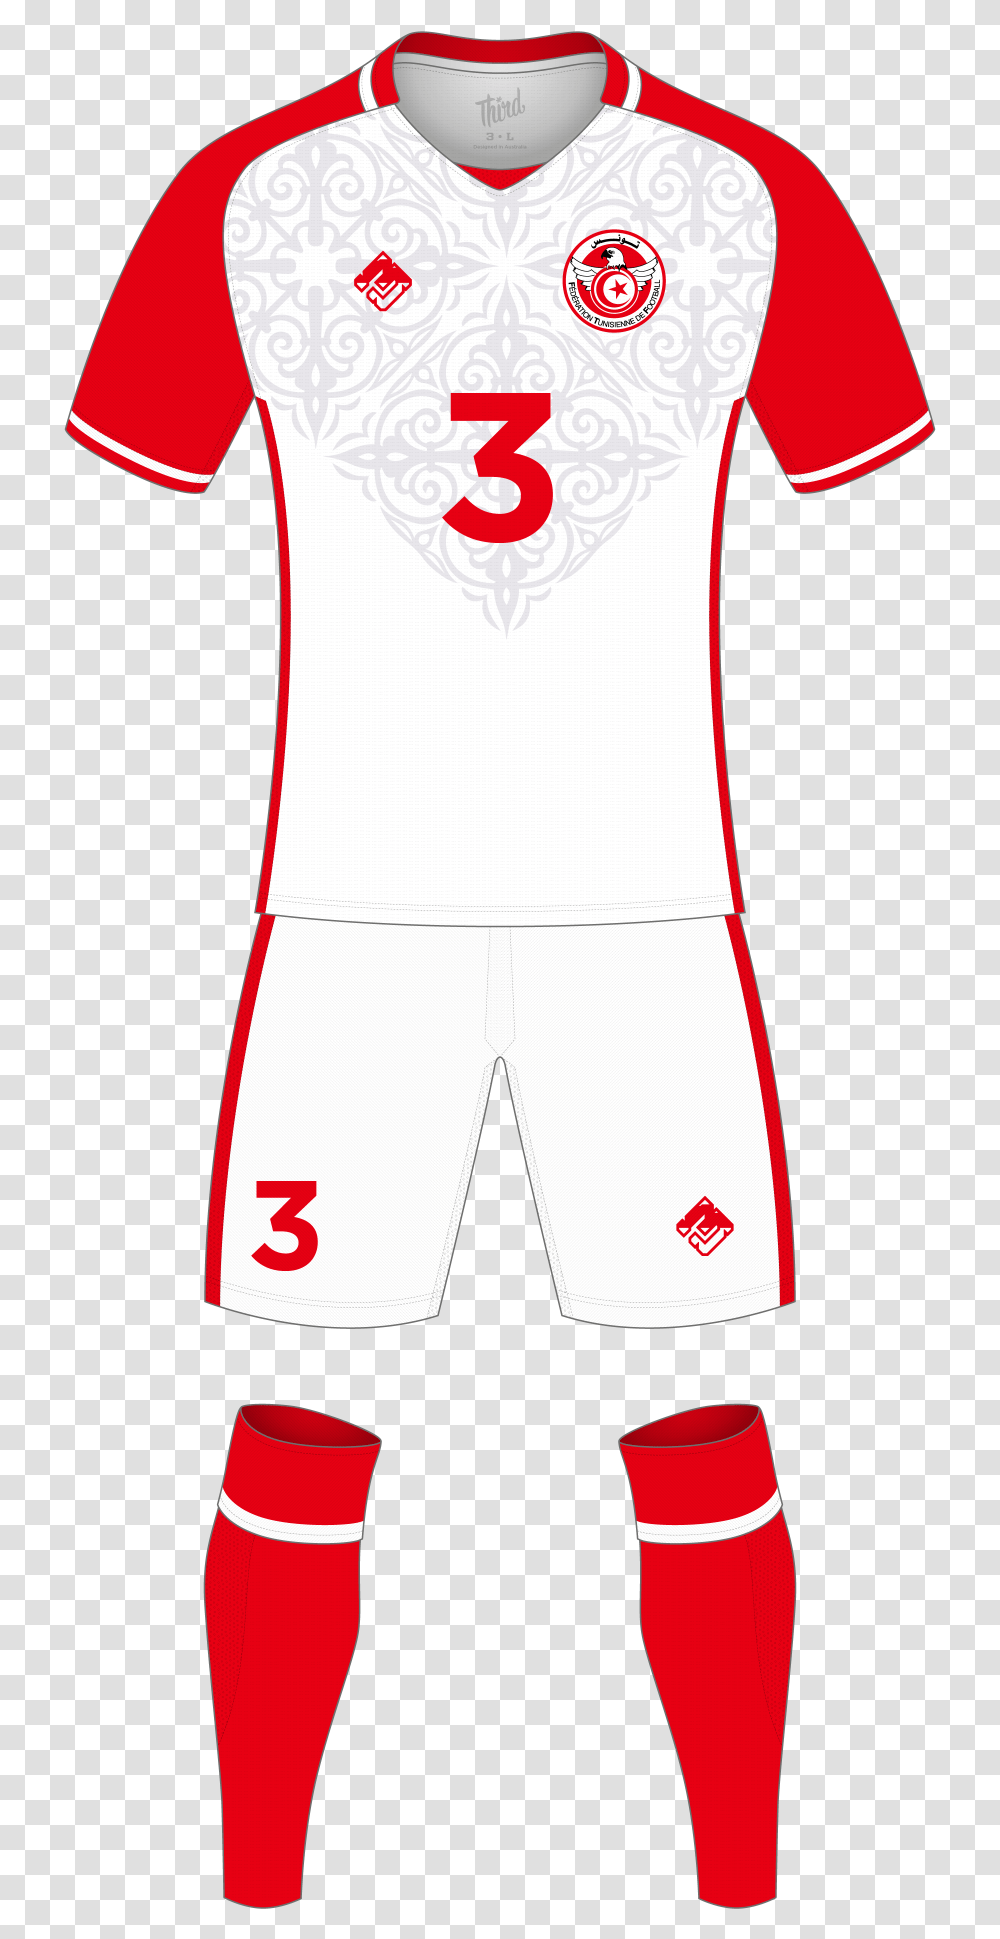 Tunisia World Cup 2018 Concept National Football Team Clothes, Apparel, Shorts, T-Shirt Transparent Png